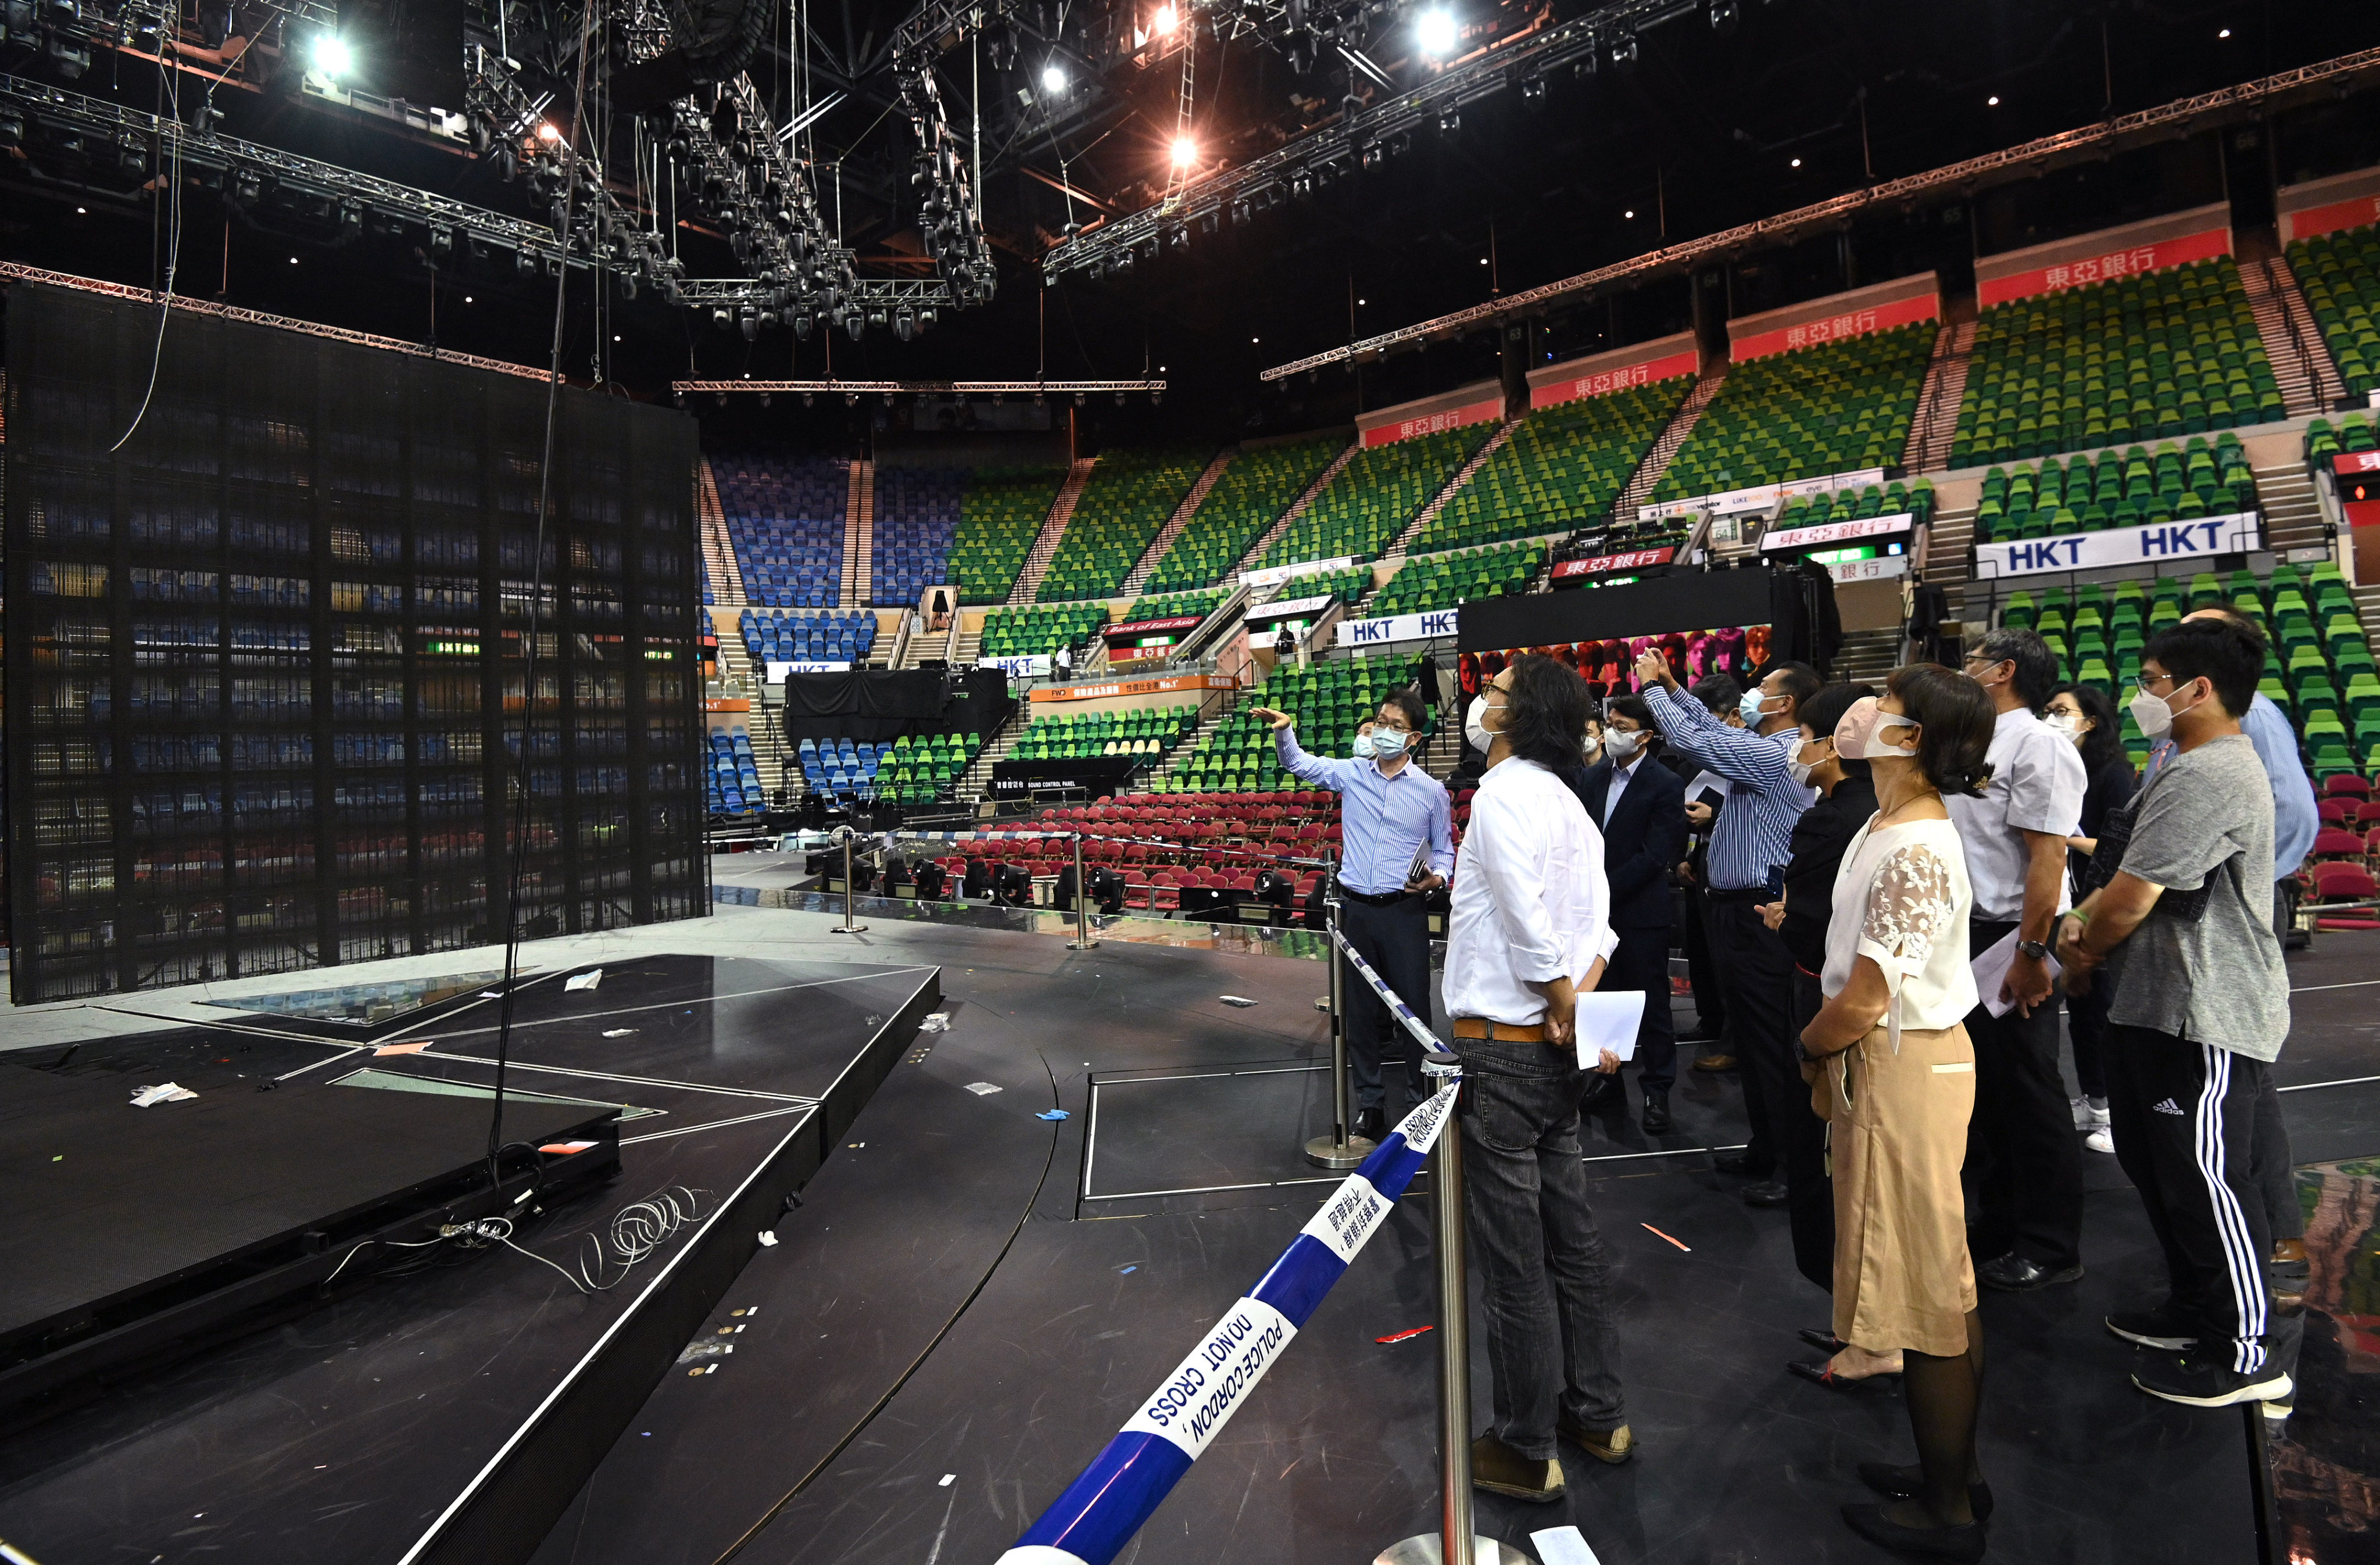 Task force members inspect the stage set-up in question at the Hong Kong Coliseum. Photo: Handout